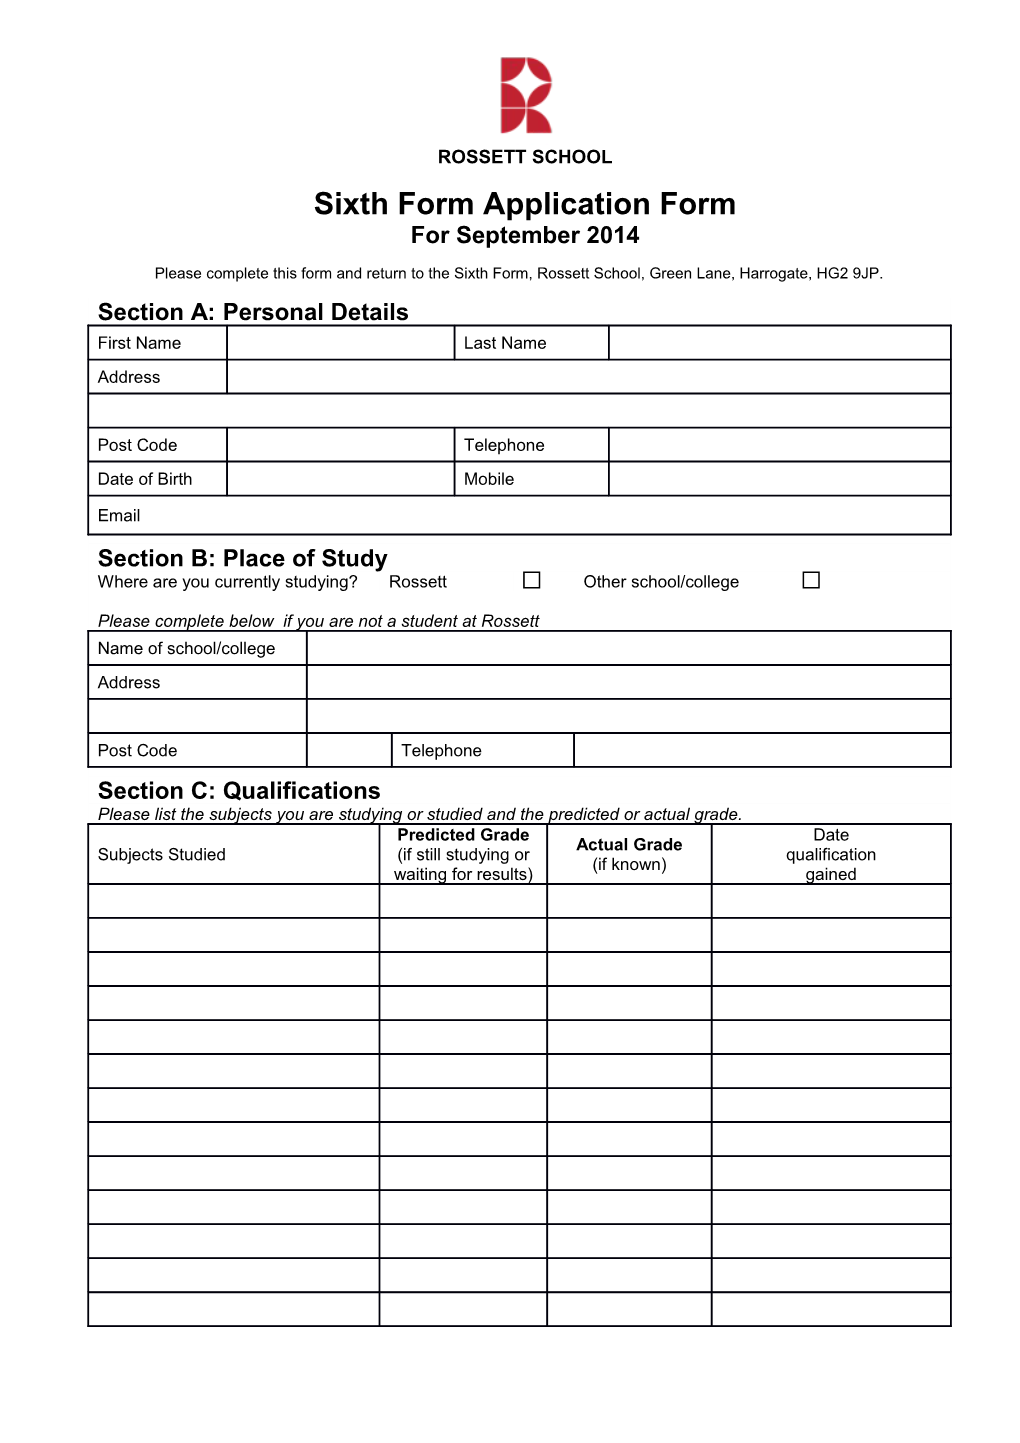 Please Complete This Form and Return to the Head of Sixth Form, Rossett School, Green Lane